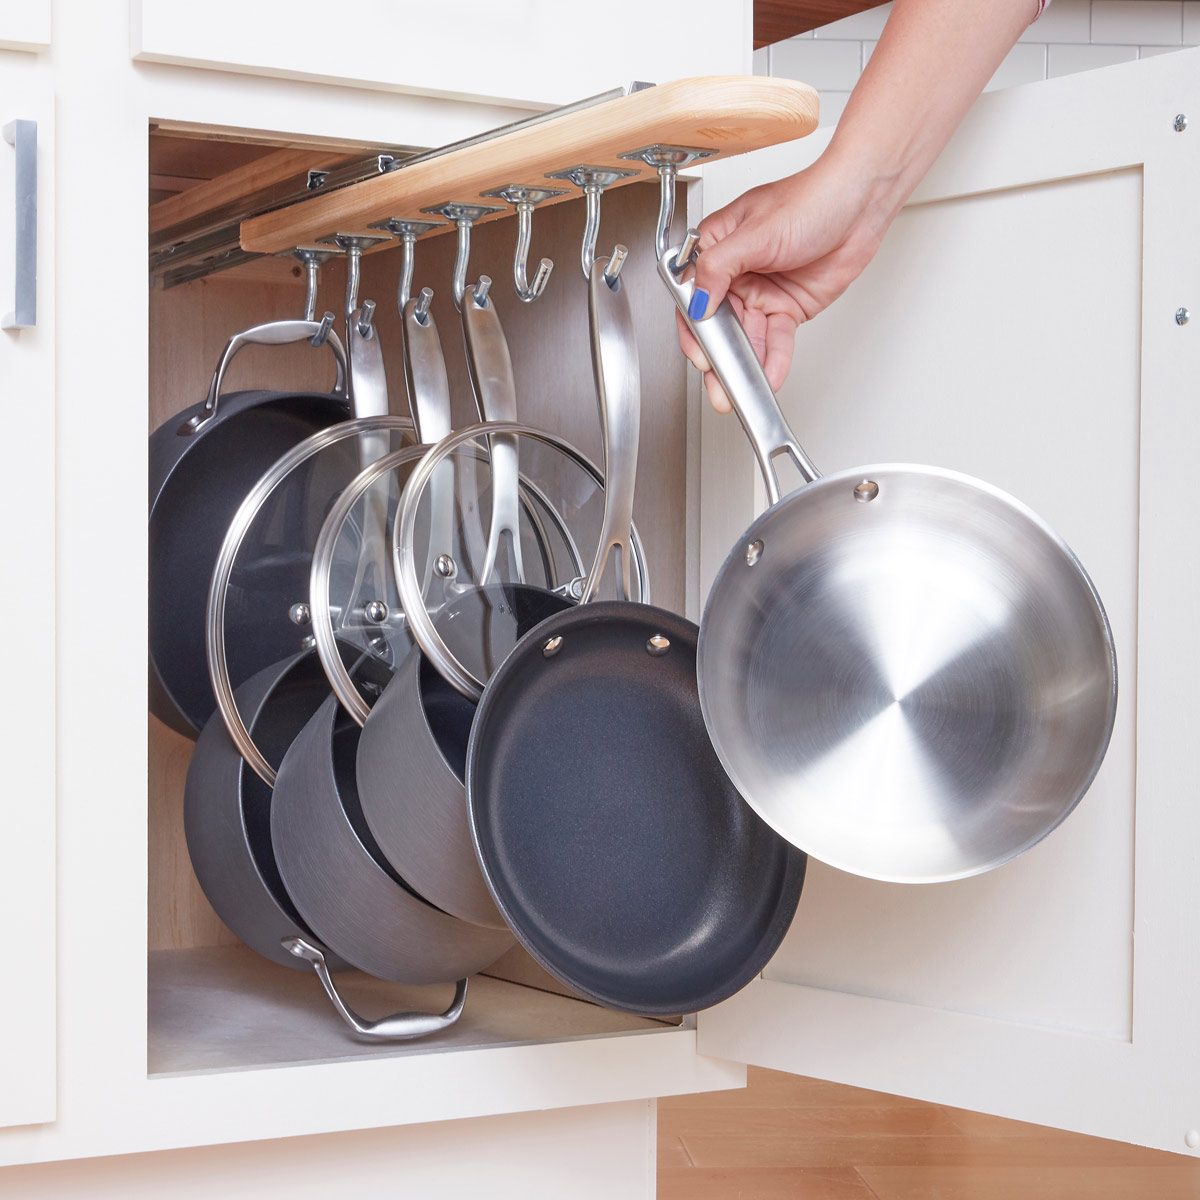 18 Creative Solutions For Storing Pots and Pans — The Family Handyman